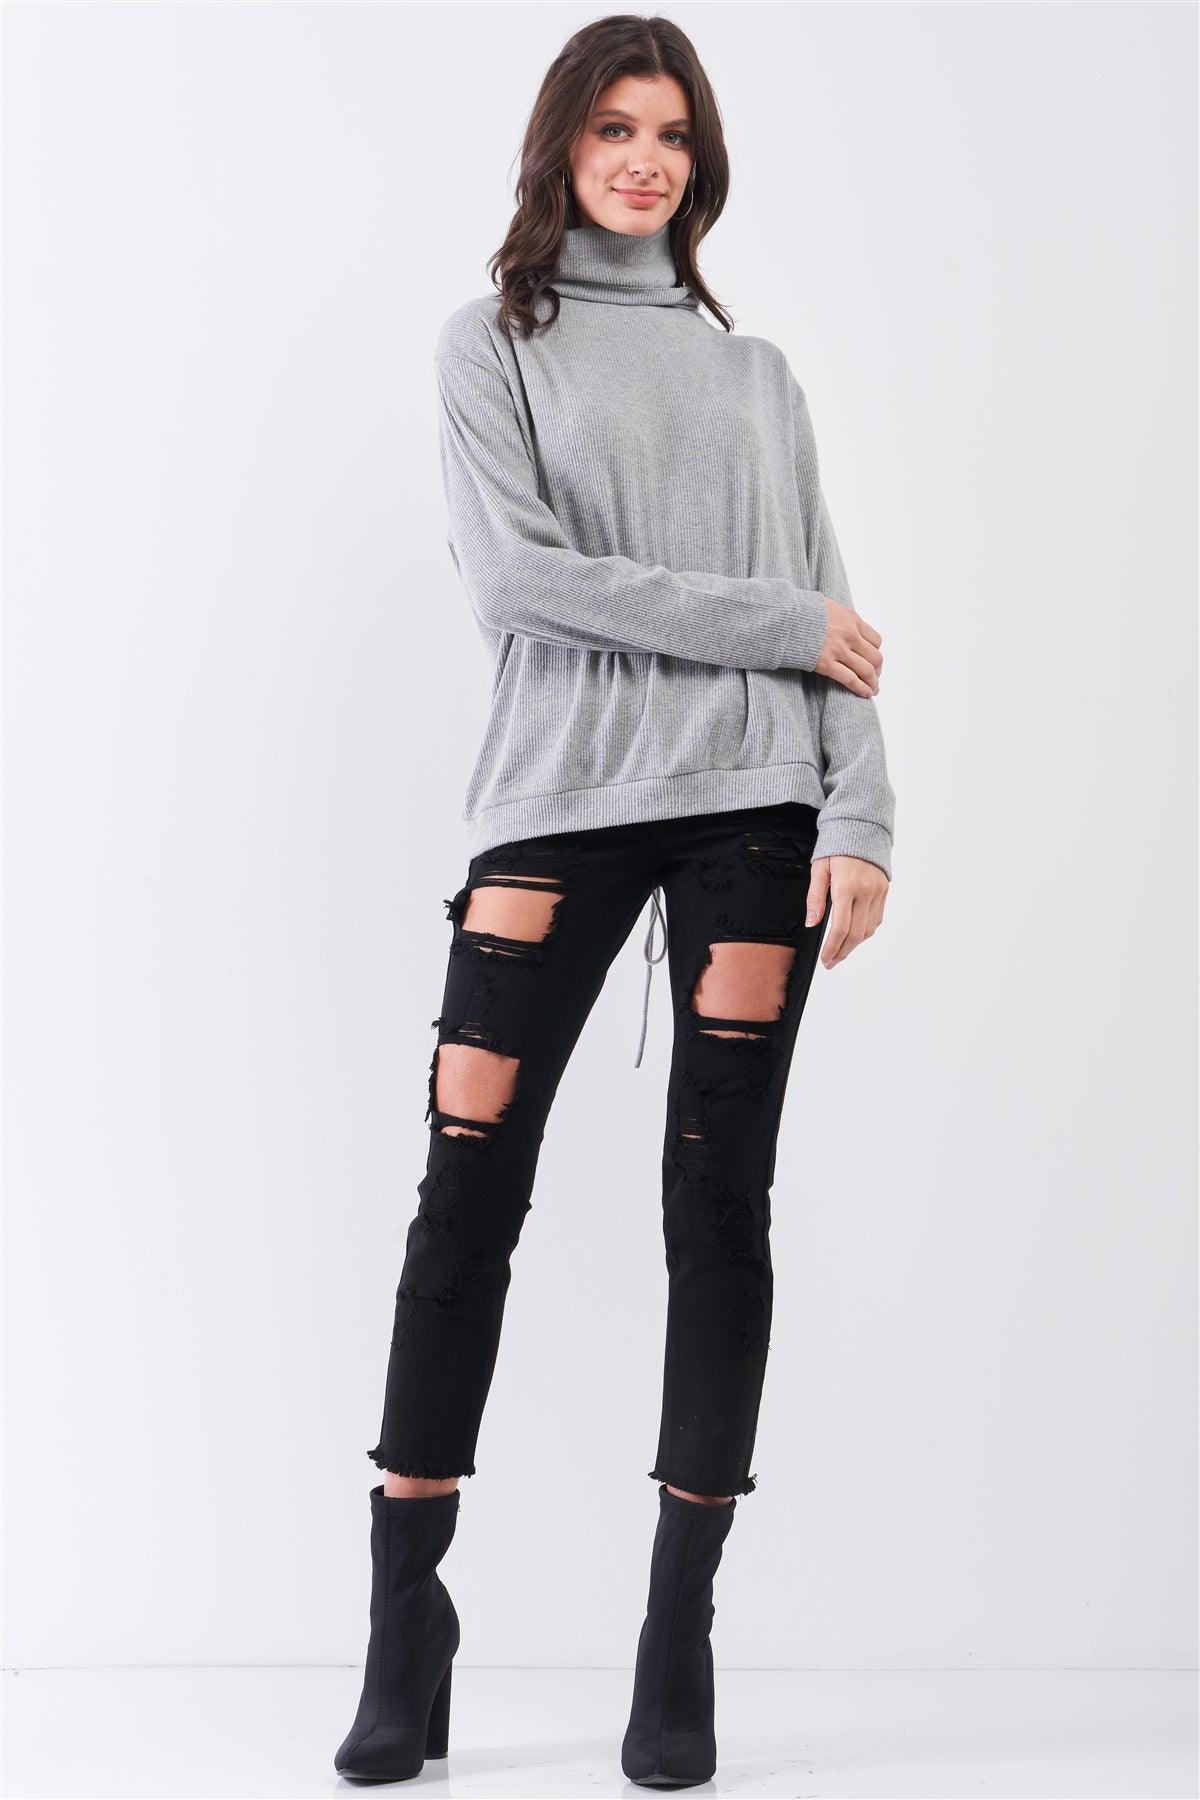 Heather Grey Long Sleeve Cut Out Lace Up Tie Back Detail Turtleneck Top